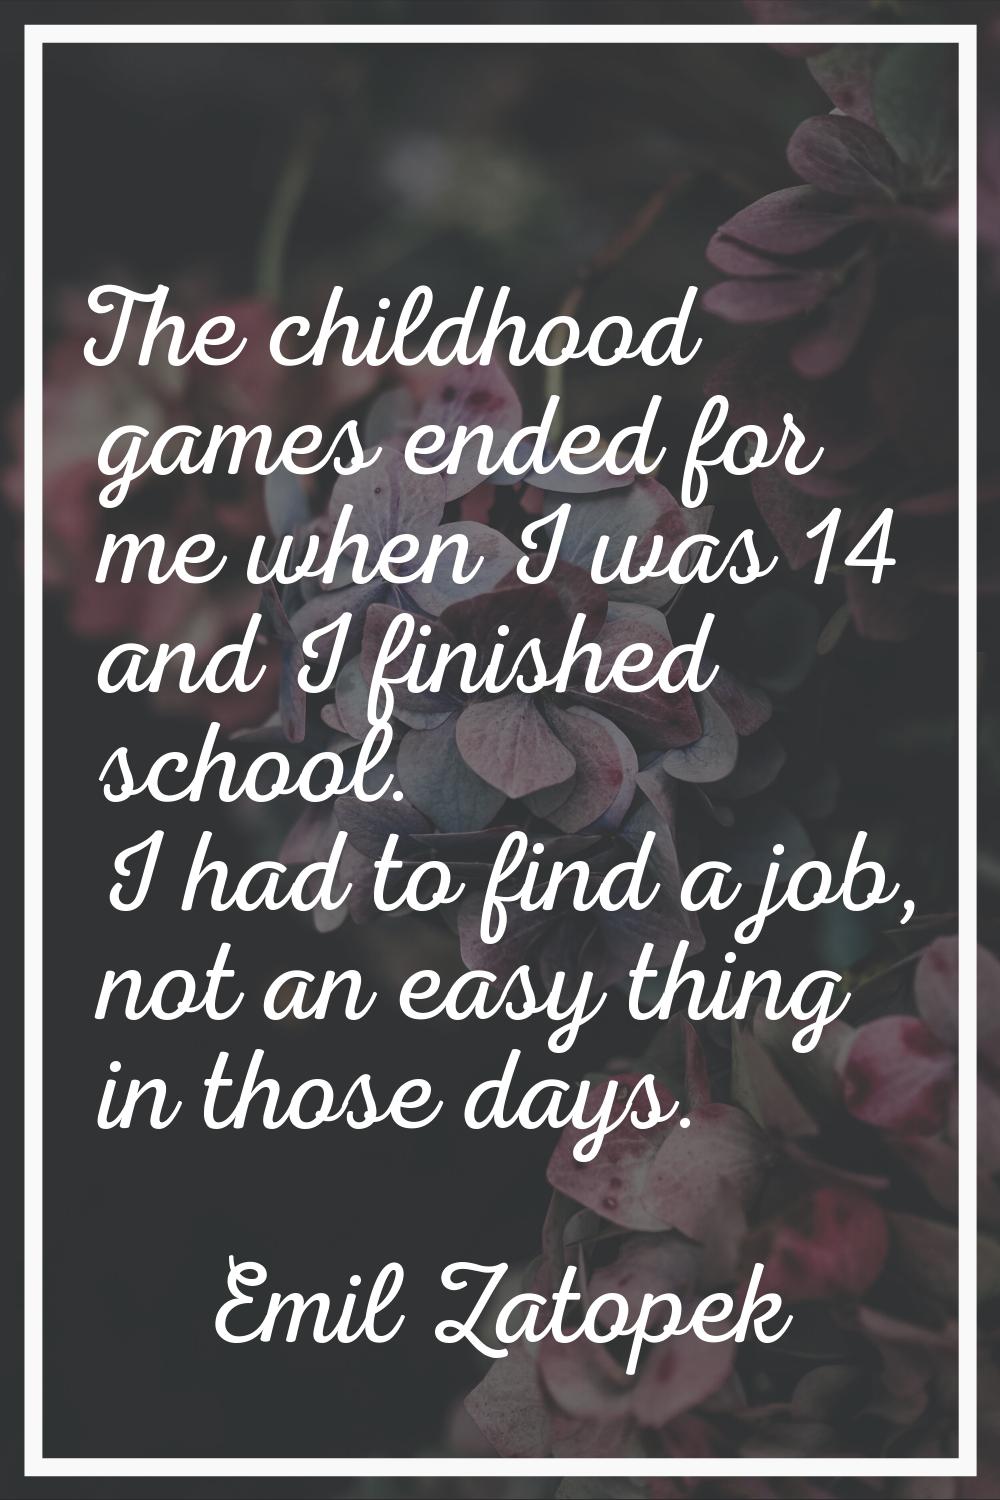 The childhood games ended for me when I was 14 and I finished school. I had to find a job, not an e